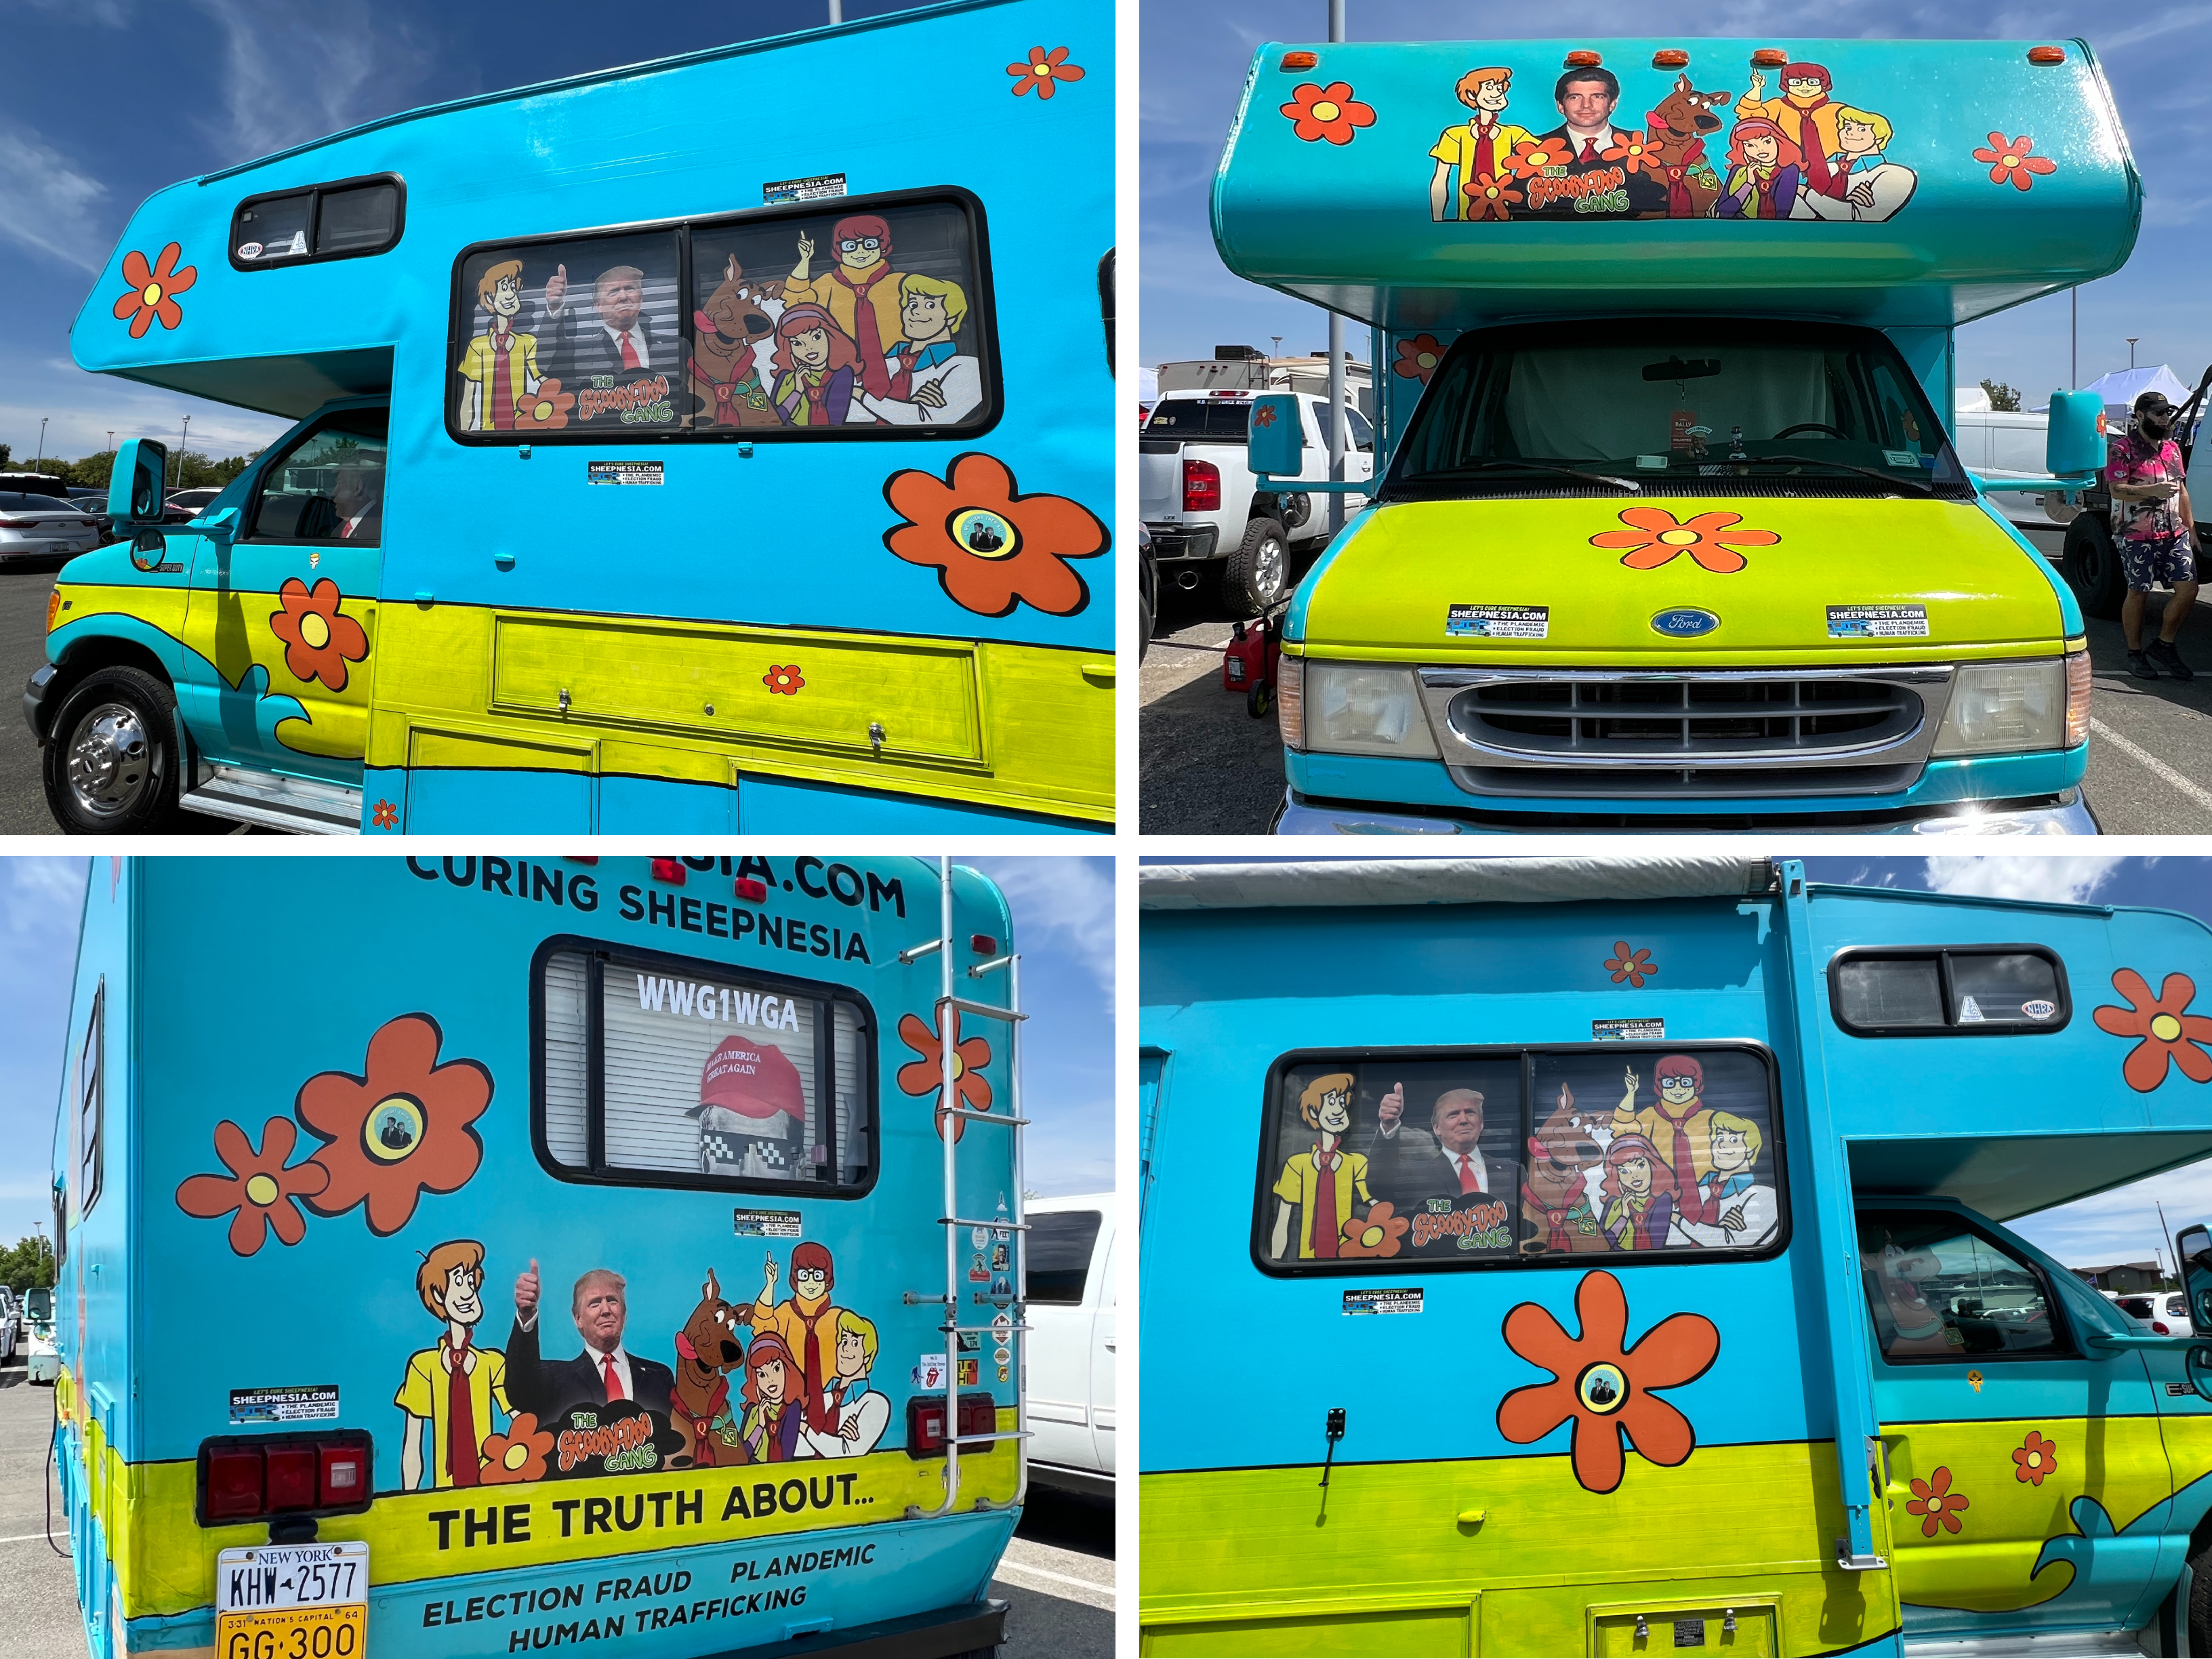 4 pictures showing each side of the heavily decorated Scooby Doo themed bus. Edits of the cartoon are mixed with photos of Trump and JFK Jr. Window wraps on the driver window show Trump, the passenger side shows Scooby. The back of the bus shows a large head of JFK Jr. with a MAGA hat and sunglasses, a sticker reads “WWG1WGA” and the bumper area reads “The truth about election fraud, pandemic, human trafficking.” The flowers printed all over the bus have stickers of Trump and JFK Jr. with the text “we got them all.”